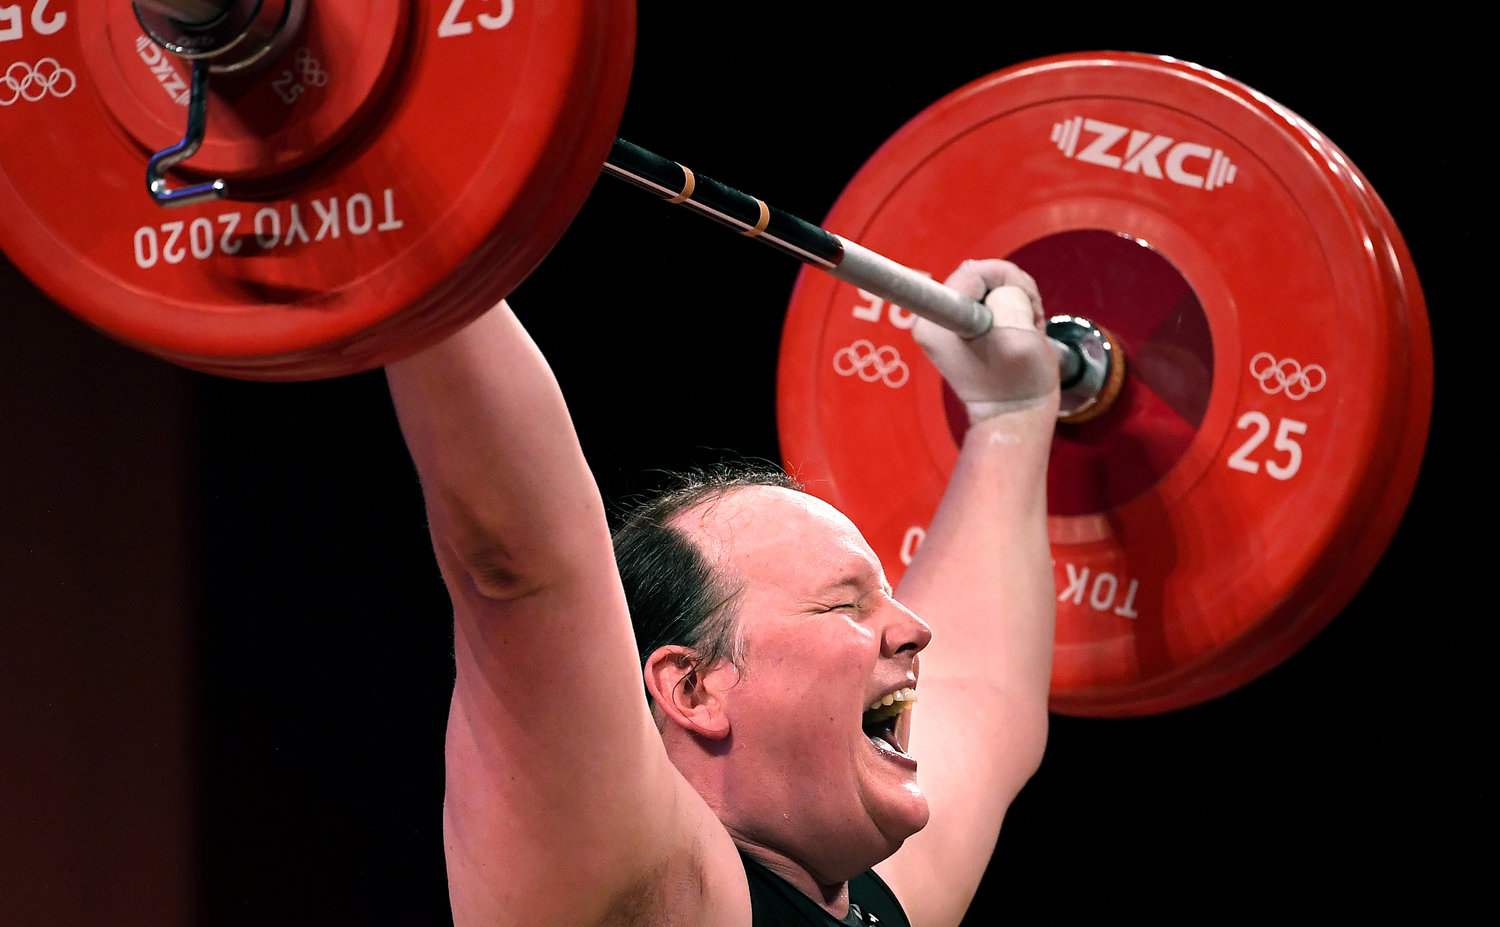 New Zealand's Laurel Hubbard, the first transgender Olympian, can't make the lift on her final try in the women's 87kg weightlifting final at the 2020 Tokyo Olympics on Aug. 2, 2021, in Tokyo.